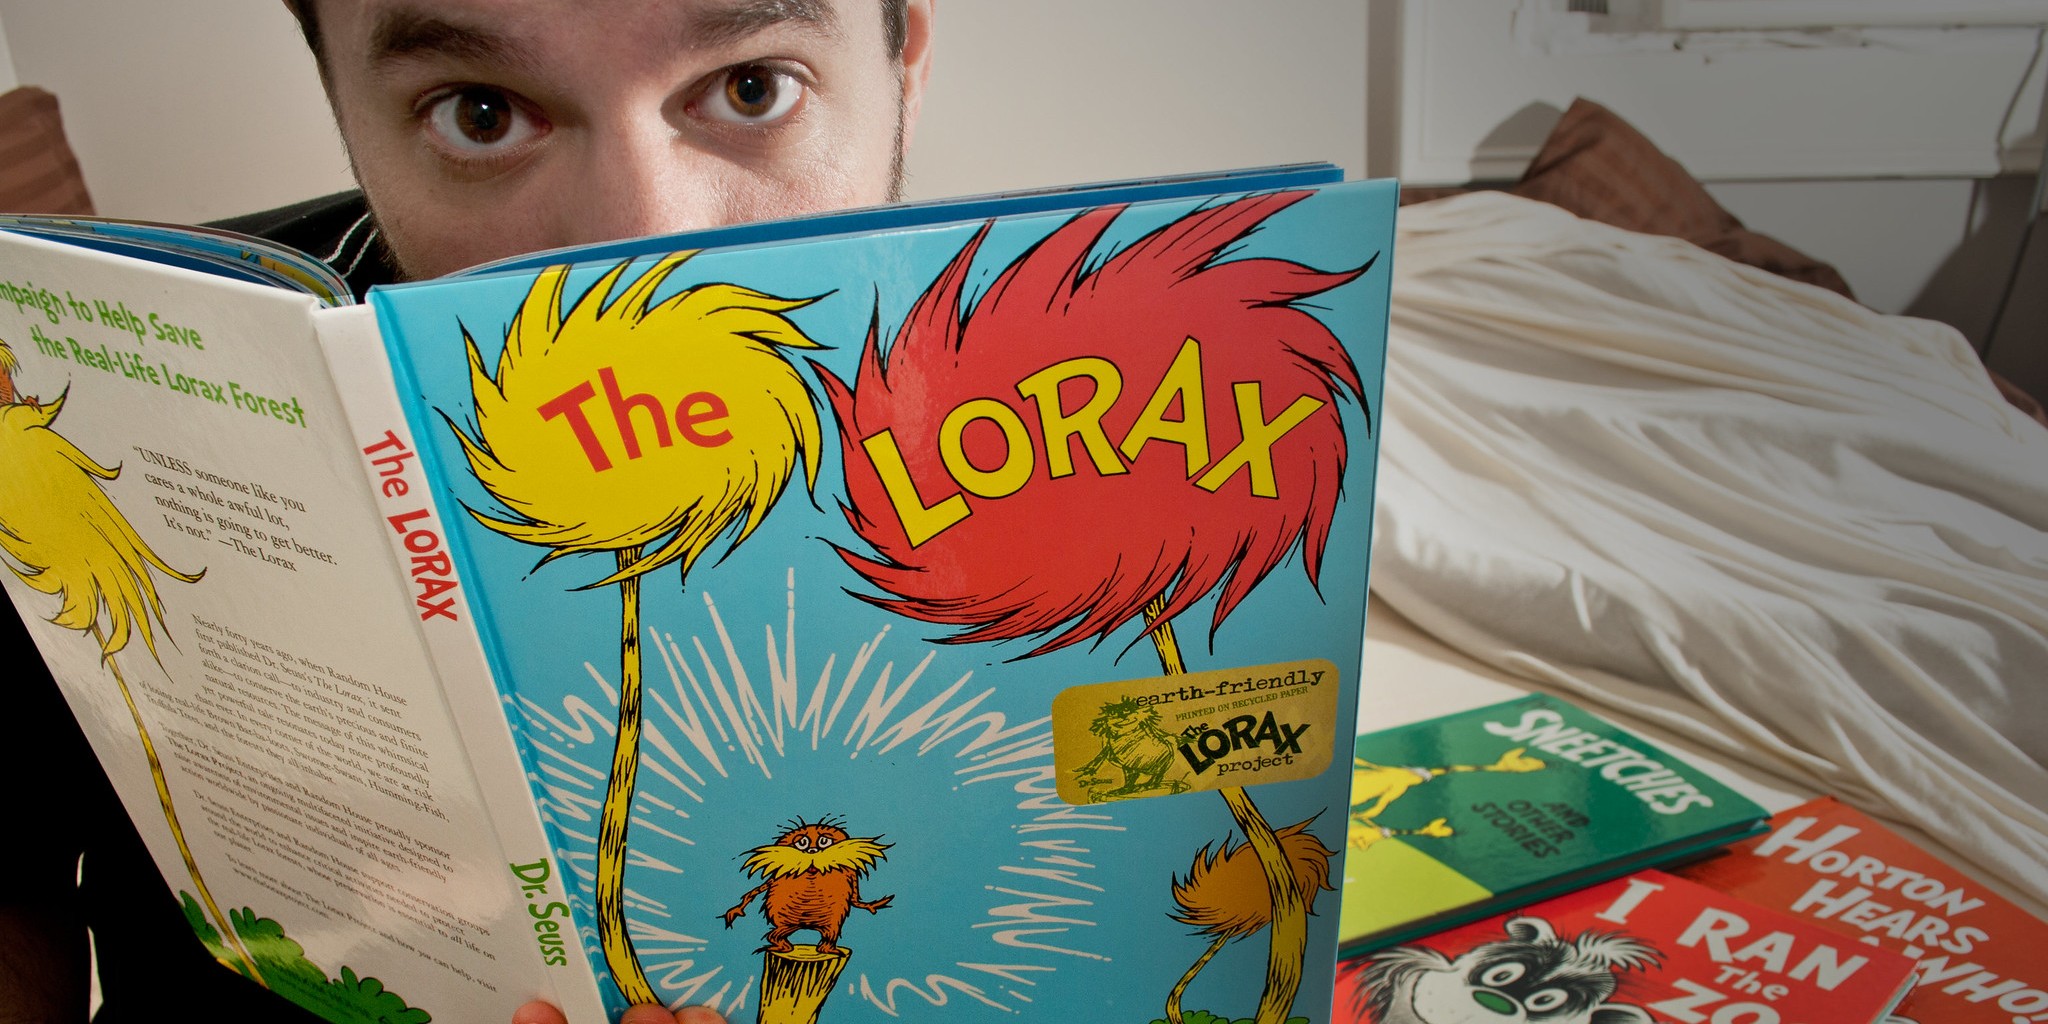 questions to ask kids when they watch the lorax